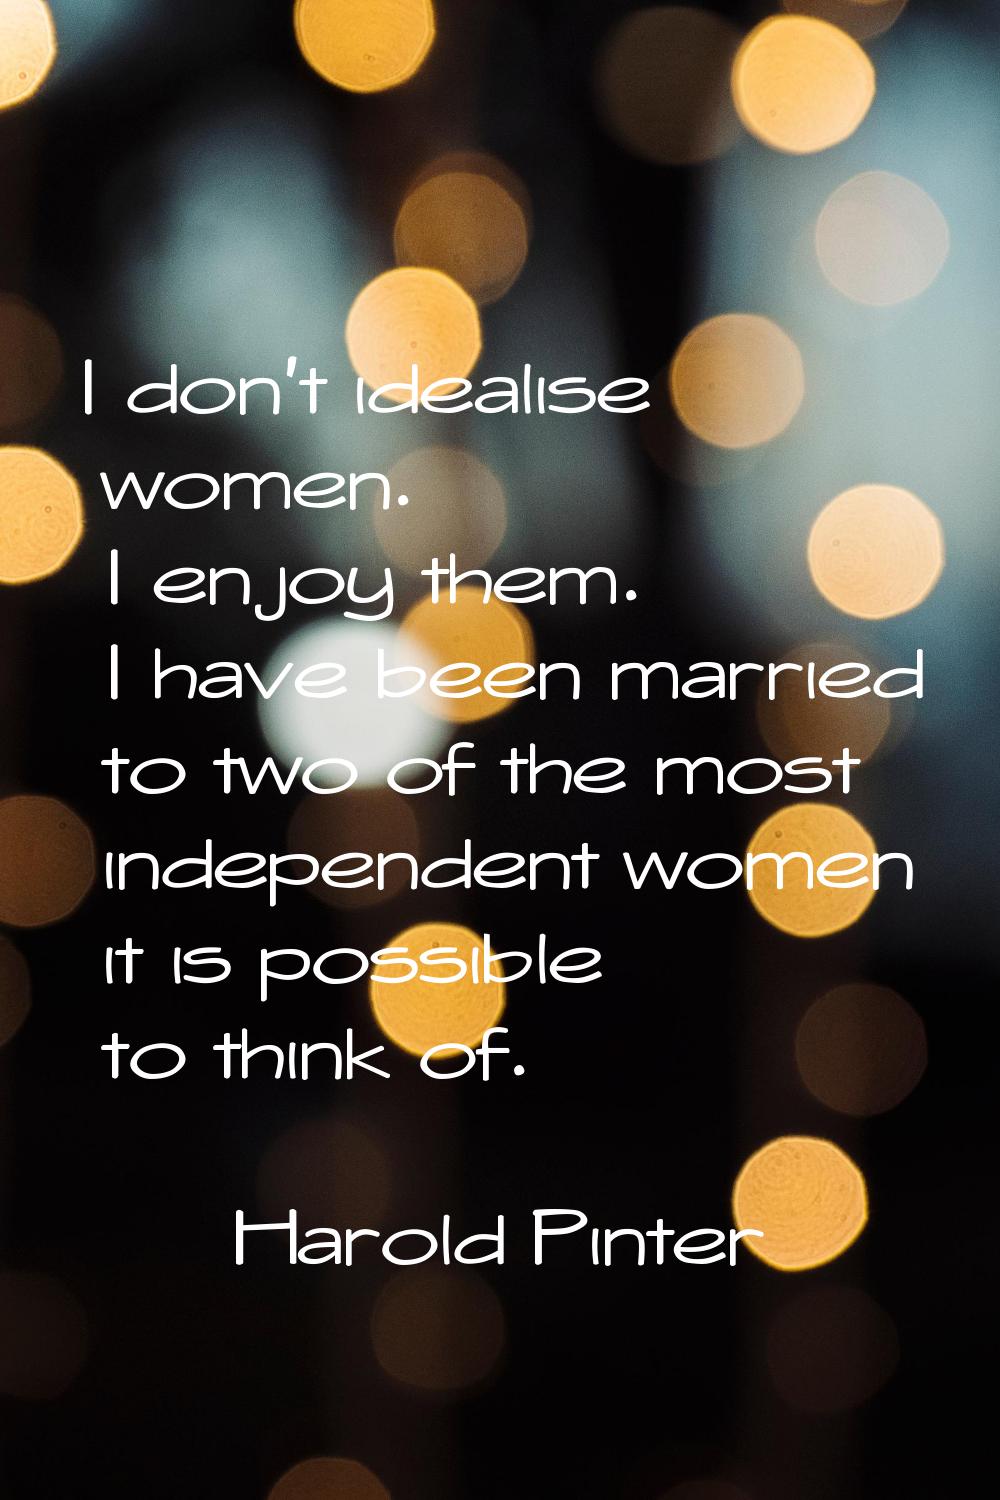 I don't idealise women. I enjoy them. I have been married to two of the most independent women it i